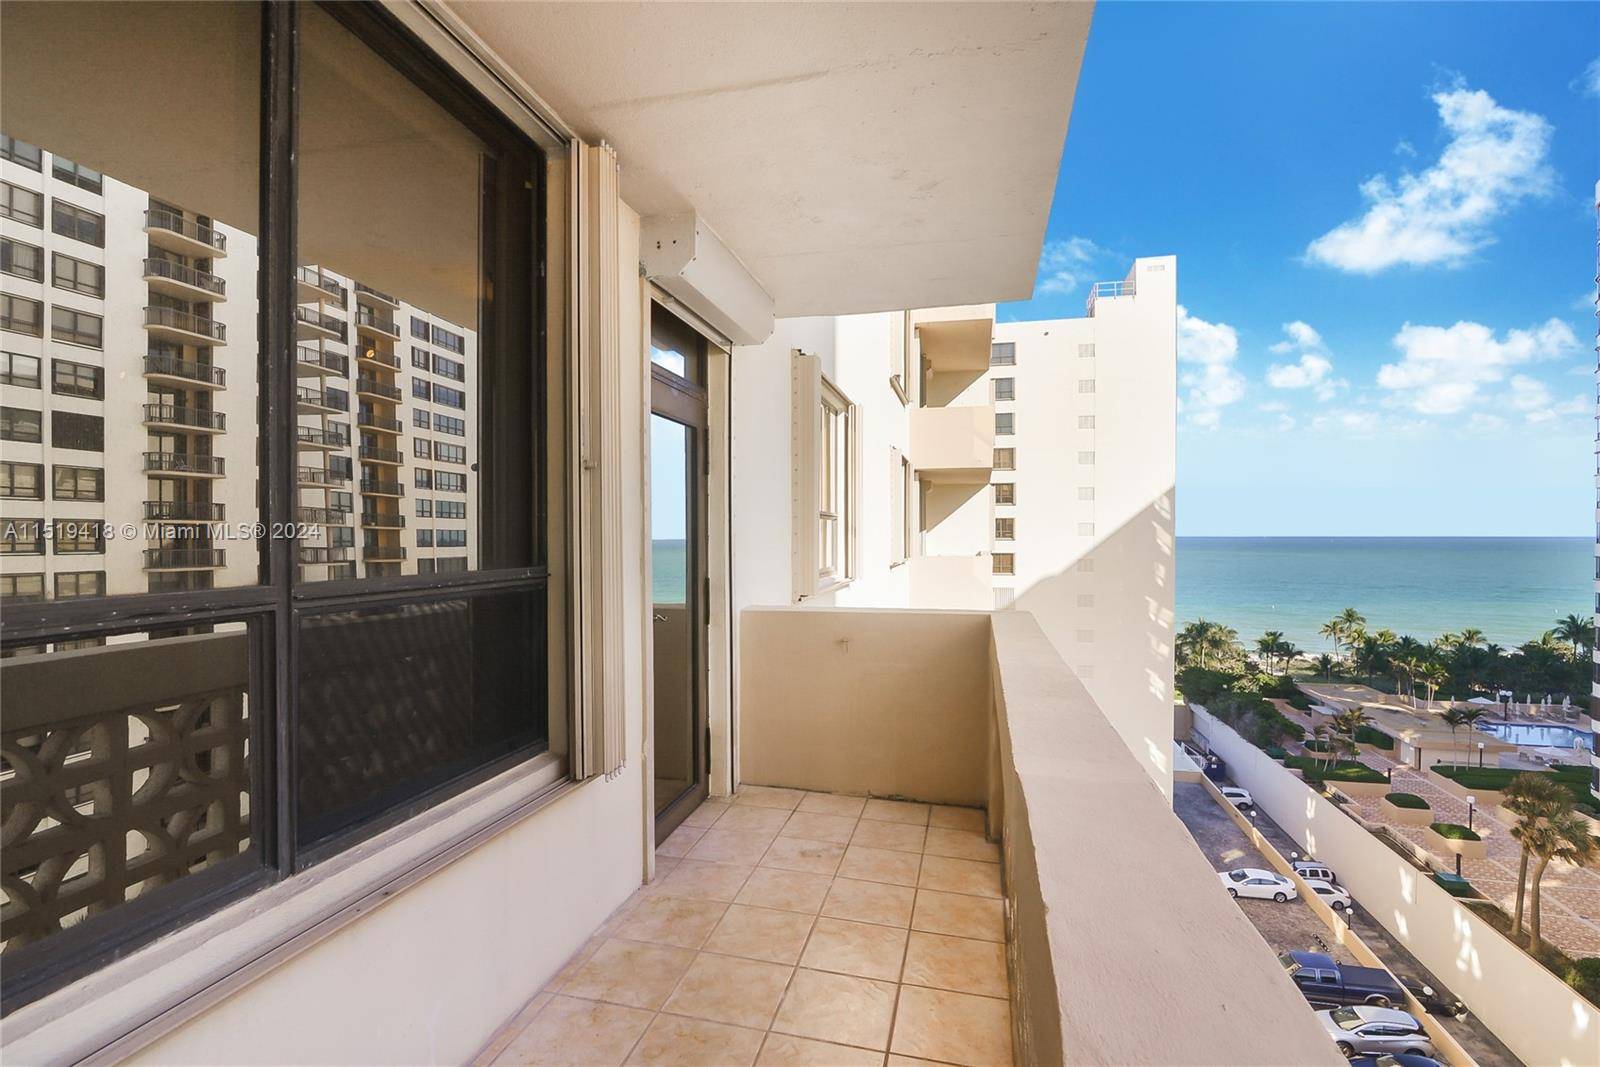 This is the best opportunity to buy a renovated condo at The Plaza Bal Harbour !